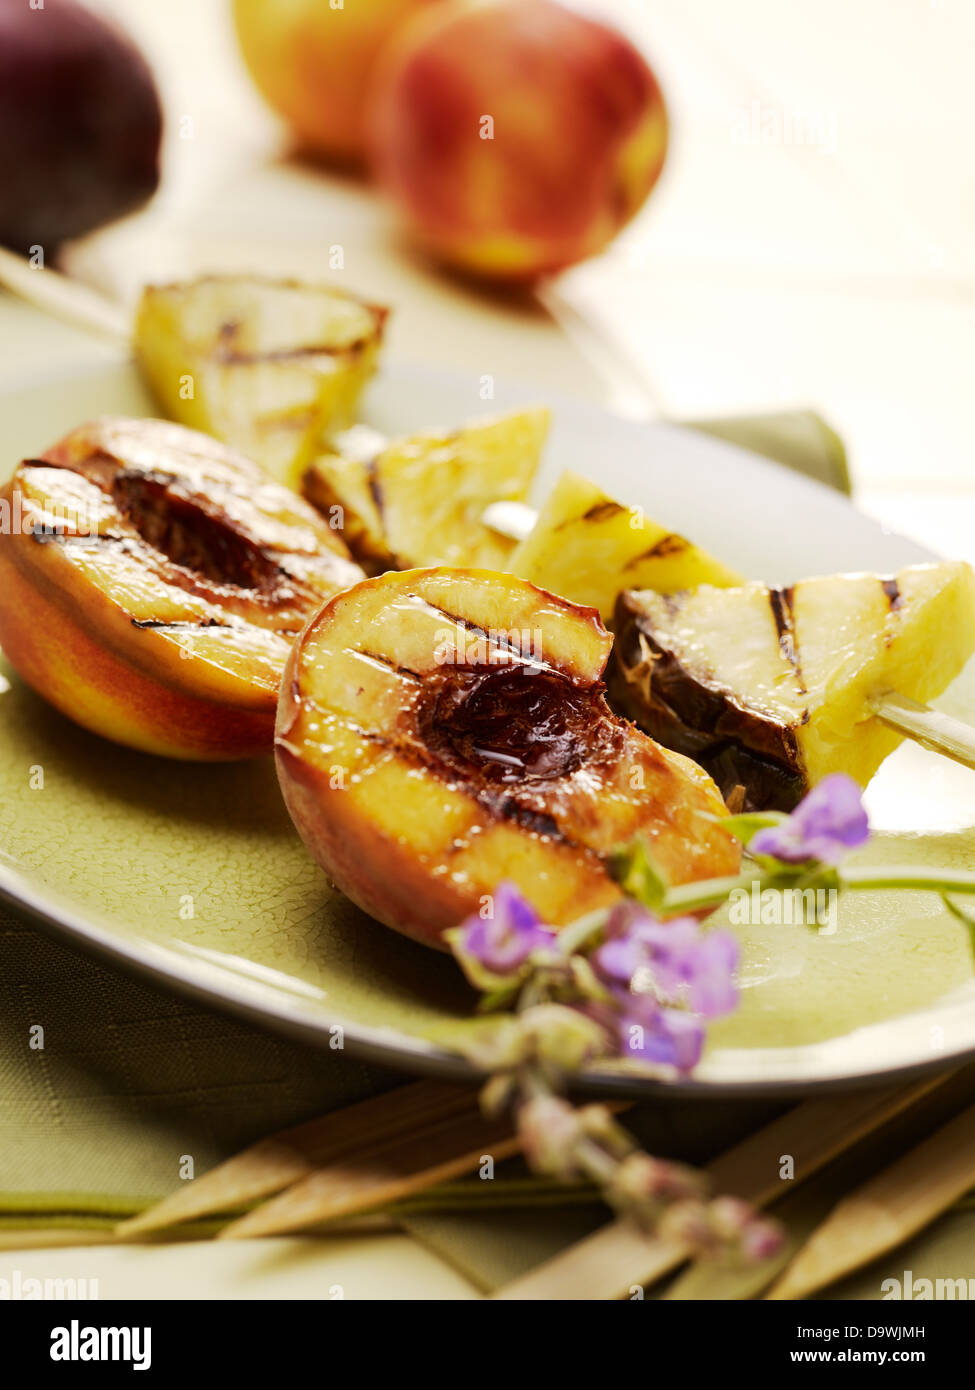 grilled fruits Stock Photo